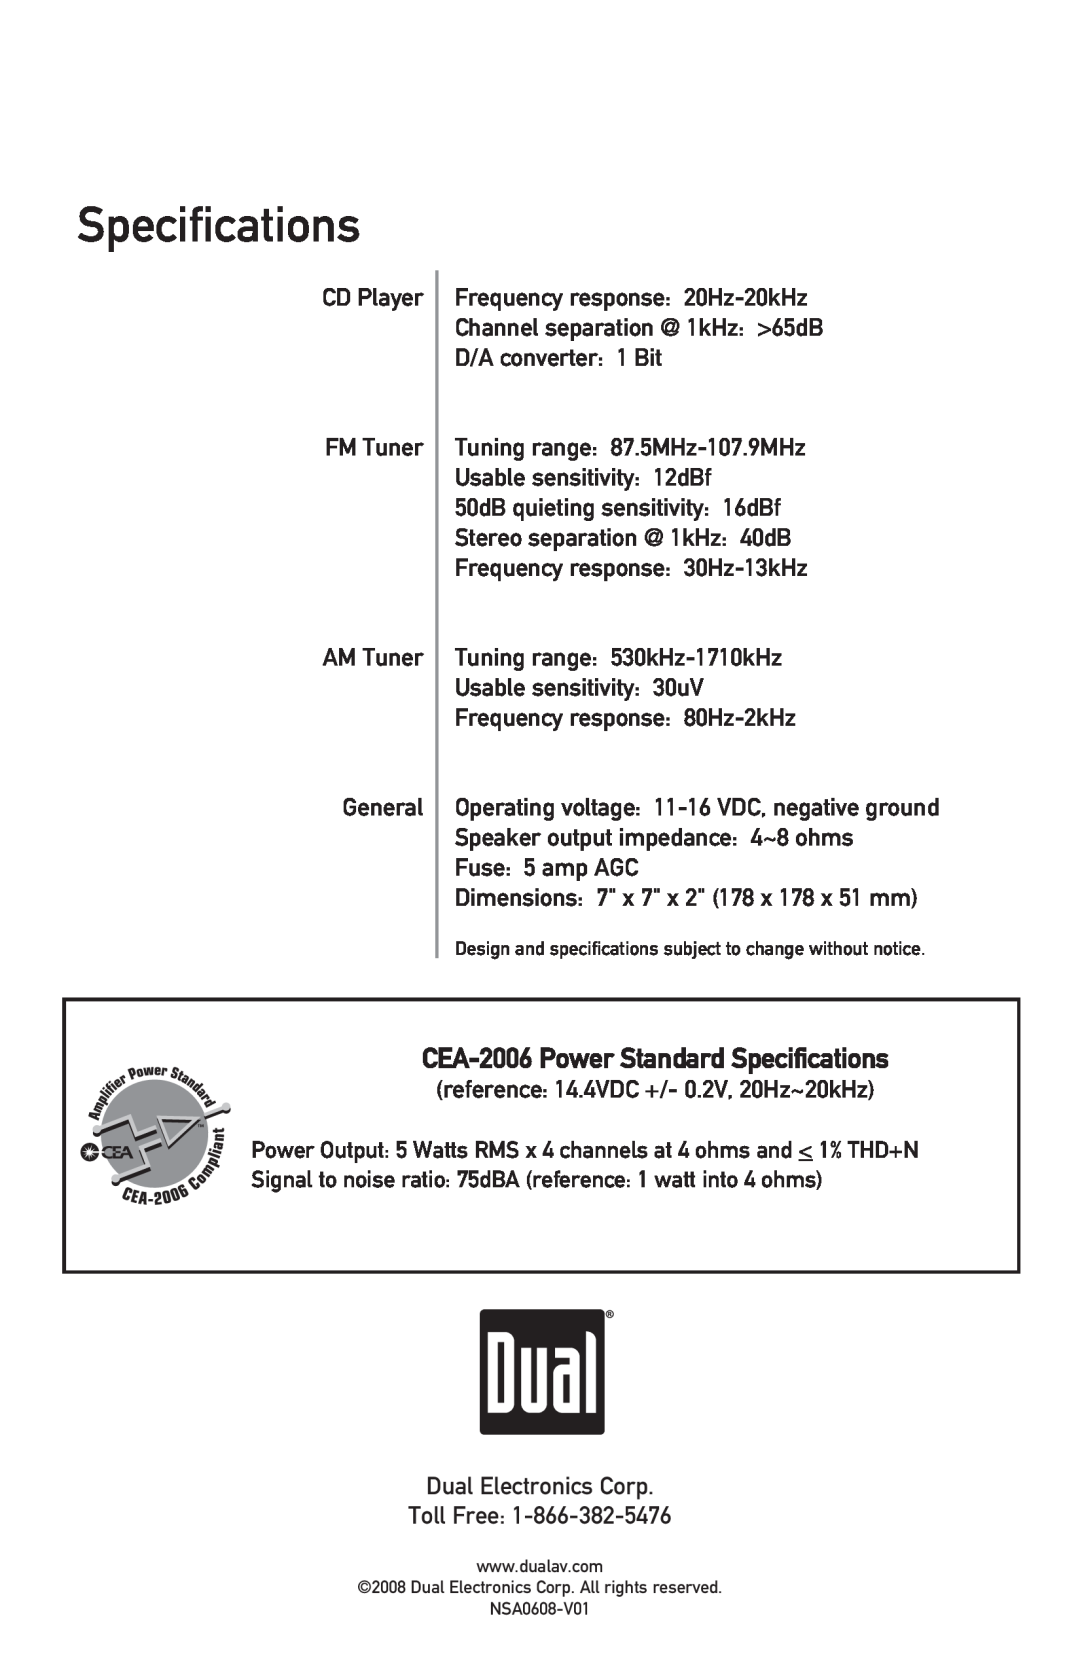 Dual XD1222 owner manual CEA-2006Power Standard Specifications 